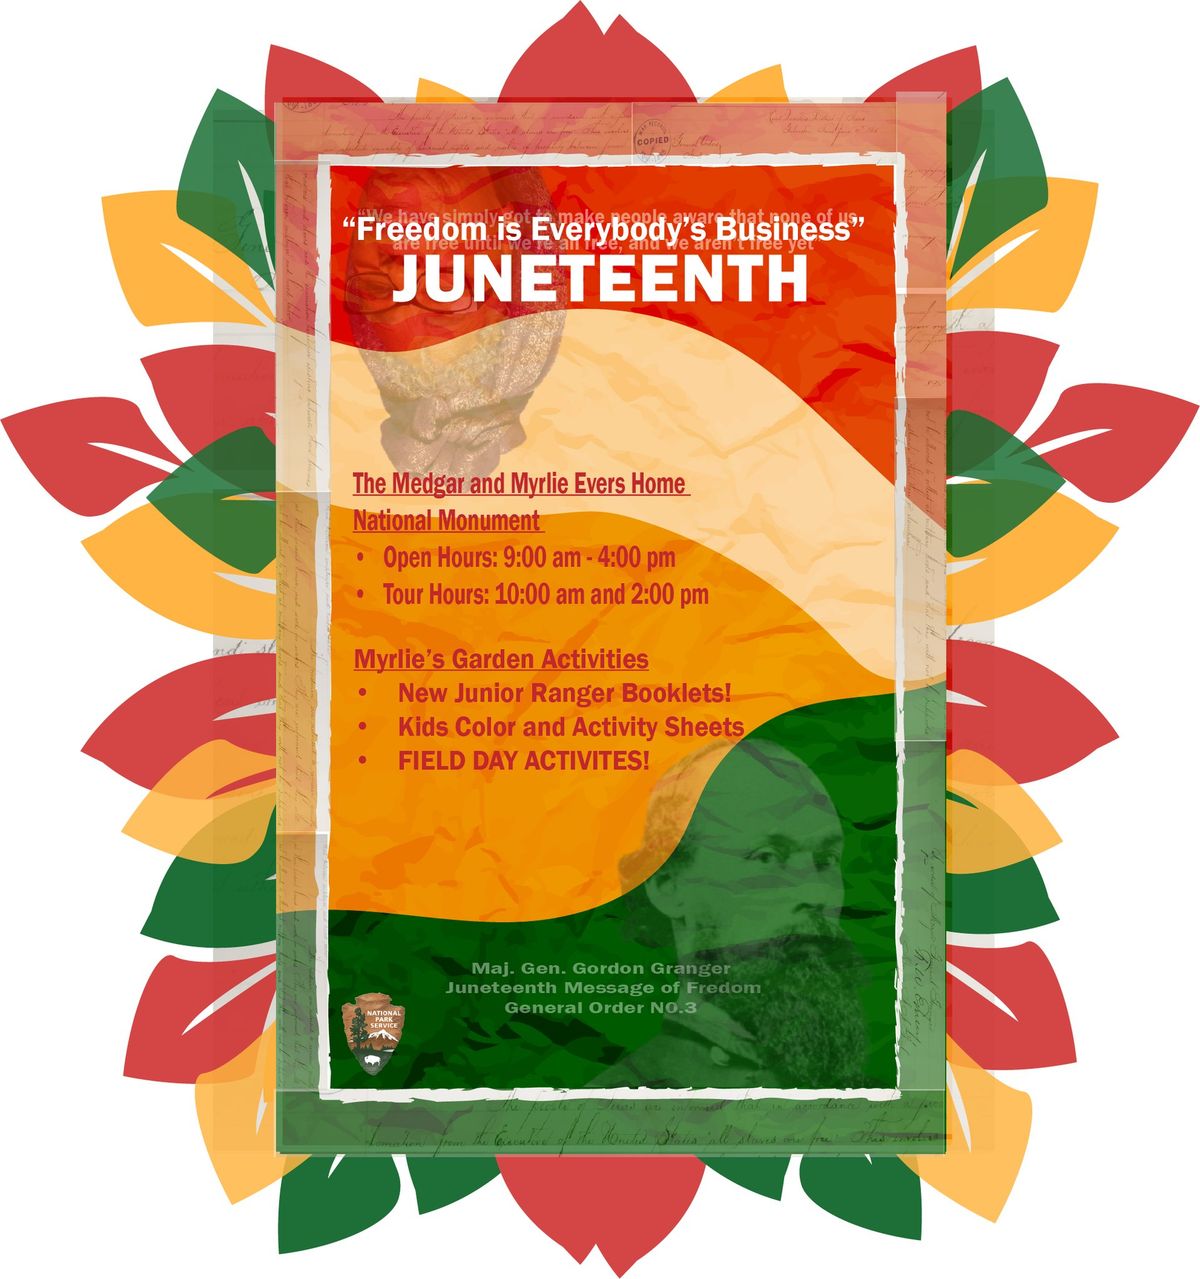 Juneteenth at the Medgar and Myrlie Evers Home National Monument